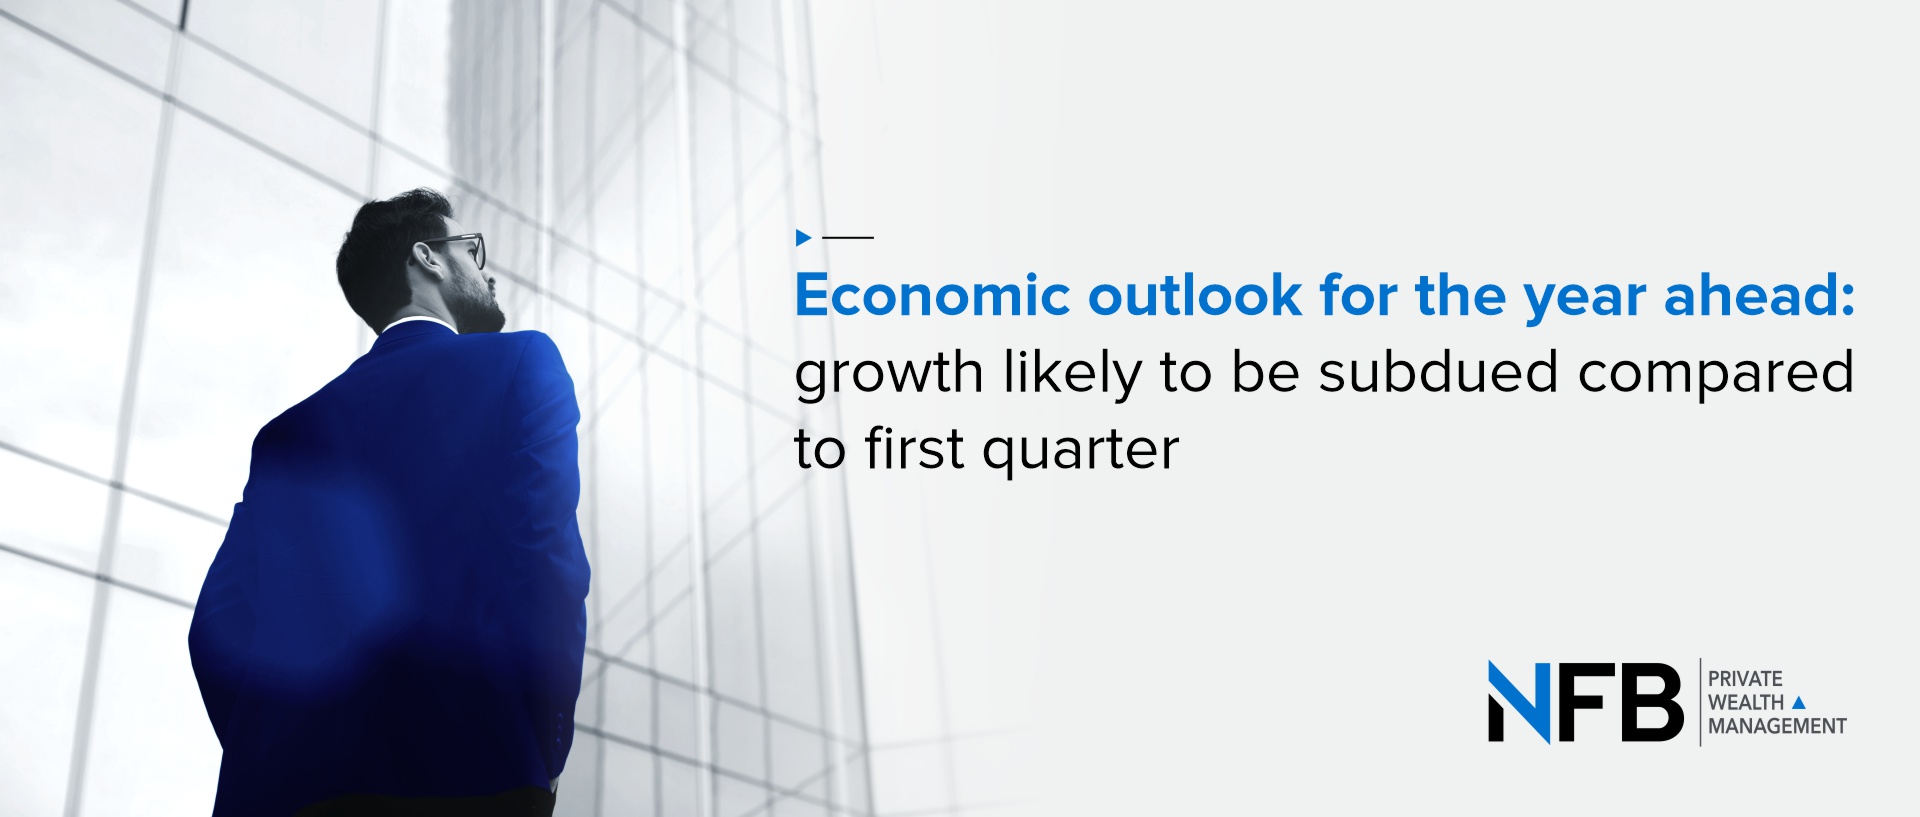 Economic outlook for the year ahead: growth likely to be subdued compared to first quarter